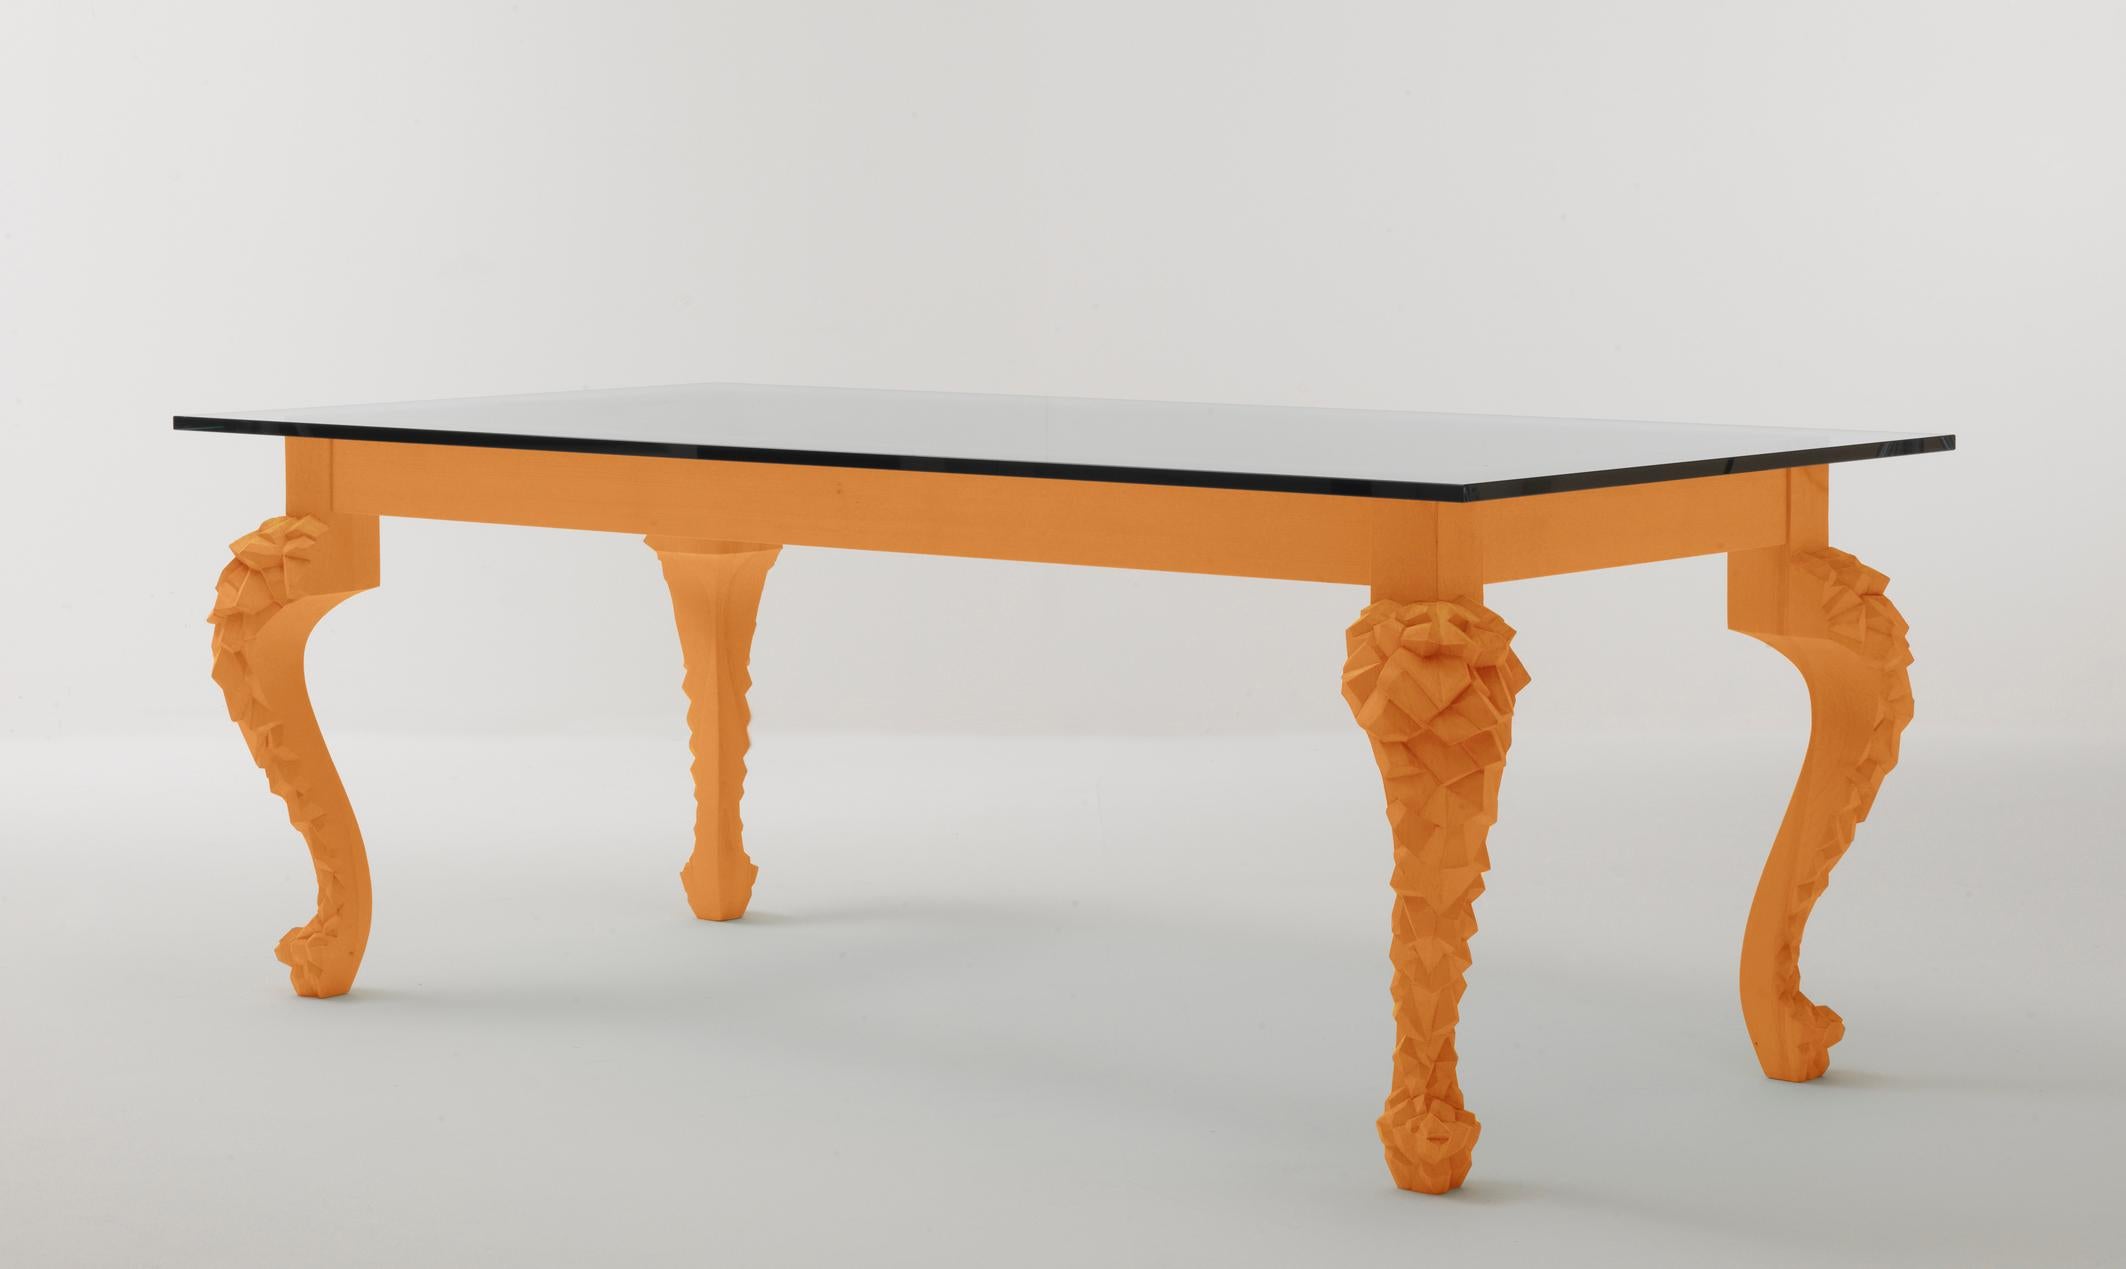 Step into the world of artisanal excellence at our e-commerce platform, where the dining table becomes a canvas of fun and creativity. Explore the exquisite craftsmanship of the Crusty table, designed by the visionary Nigel Coates. Every detail